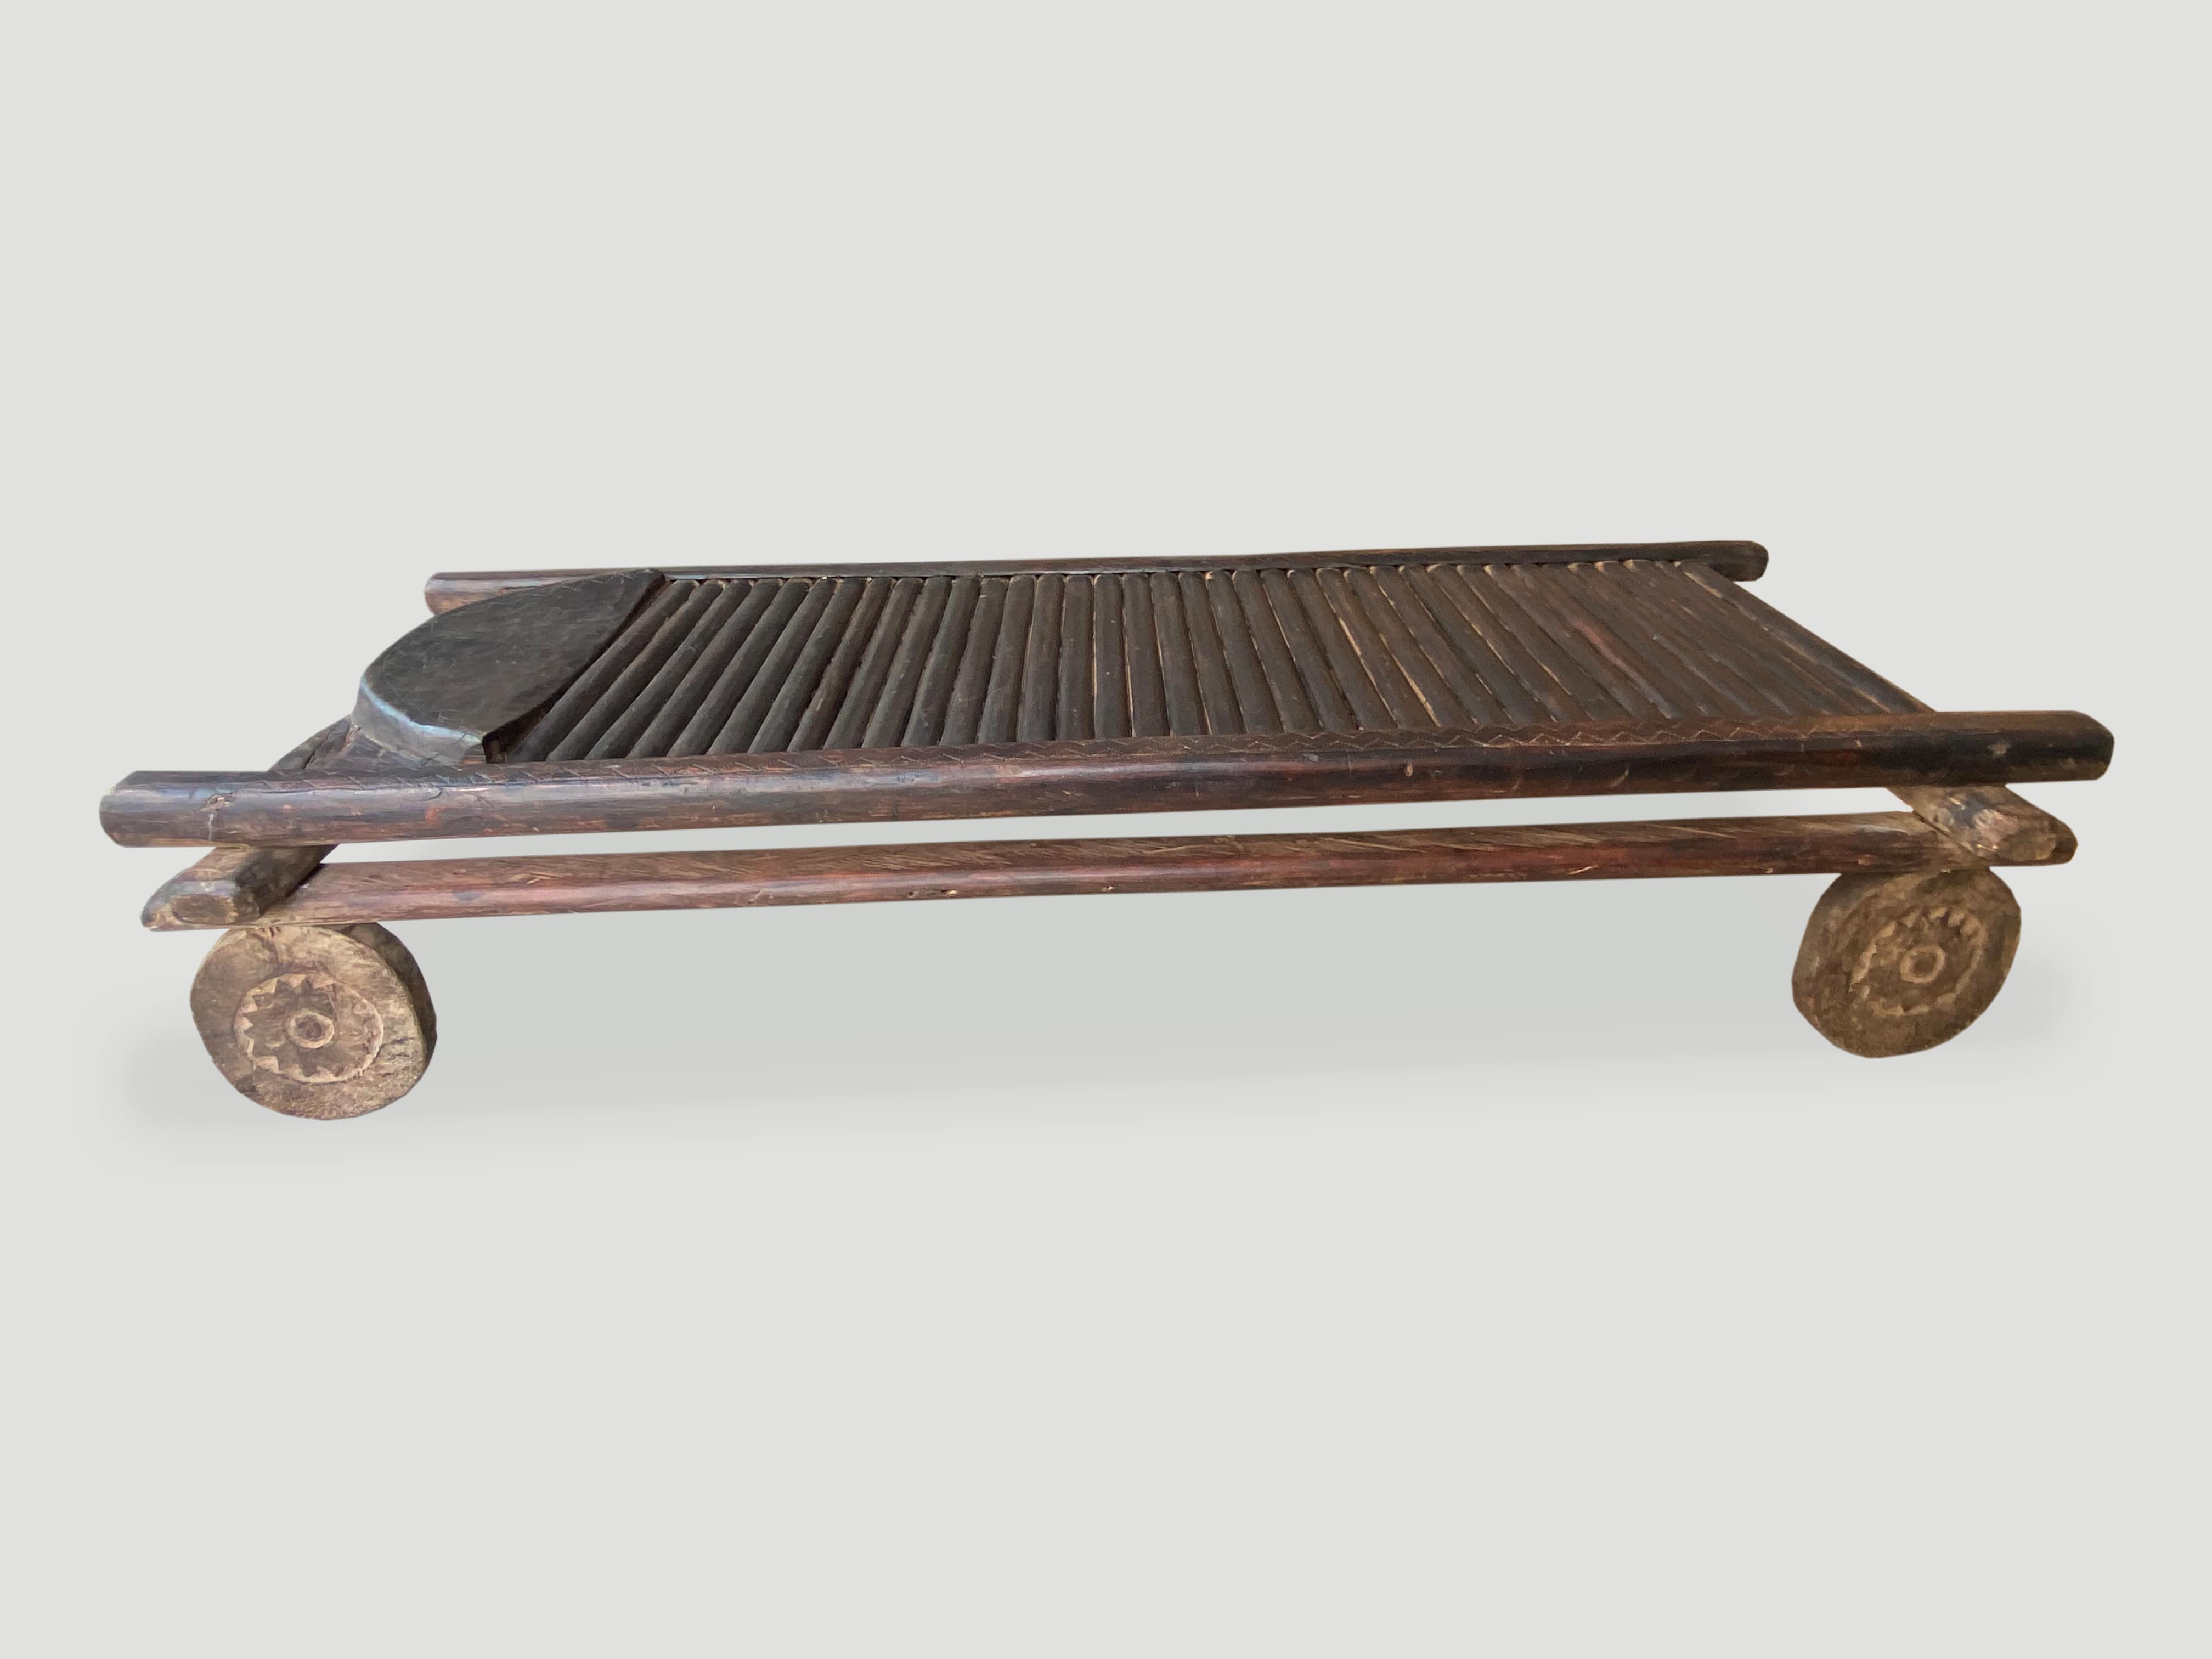 African antique bench or coffee table